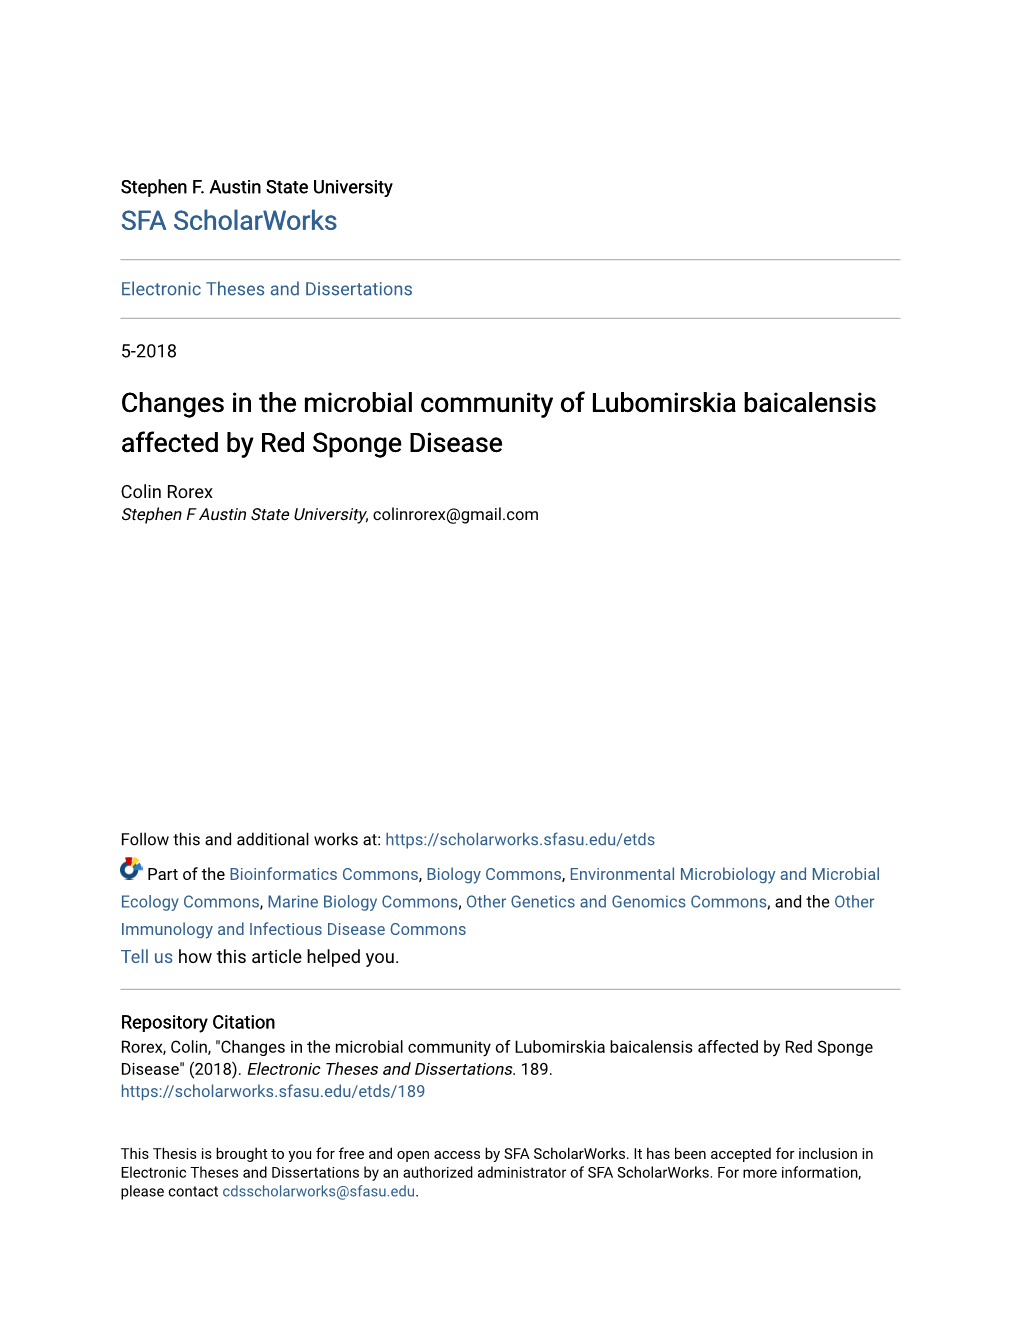 Changes in the Microbial Community of Lubomirskia Baicalensis Affected by Red Sponge Disease